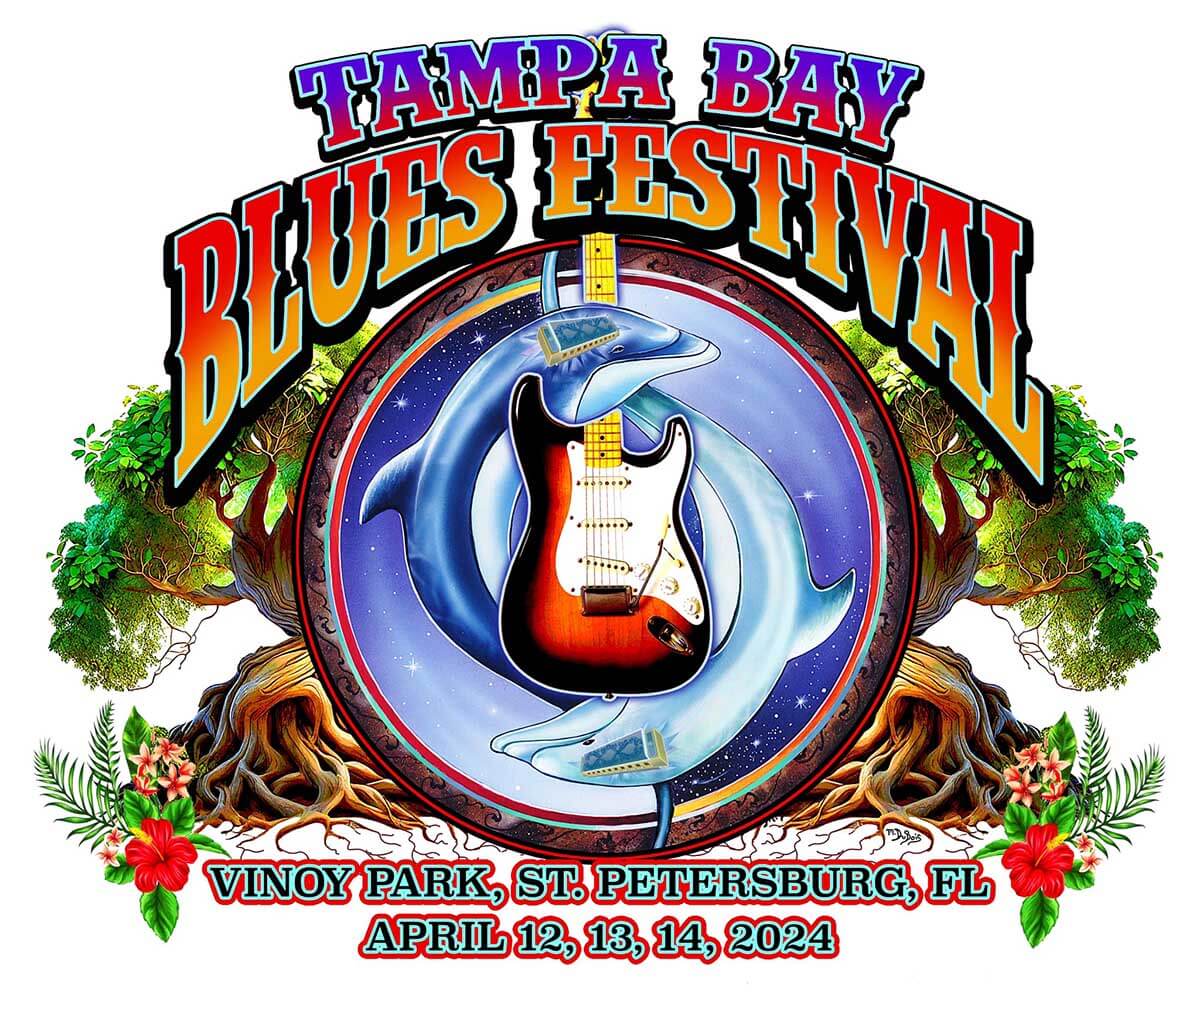 Tampa Bay Blues Festival promotional flyer